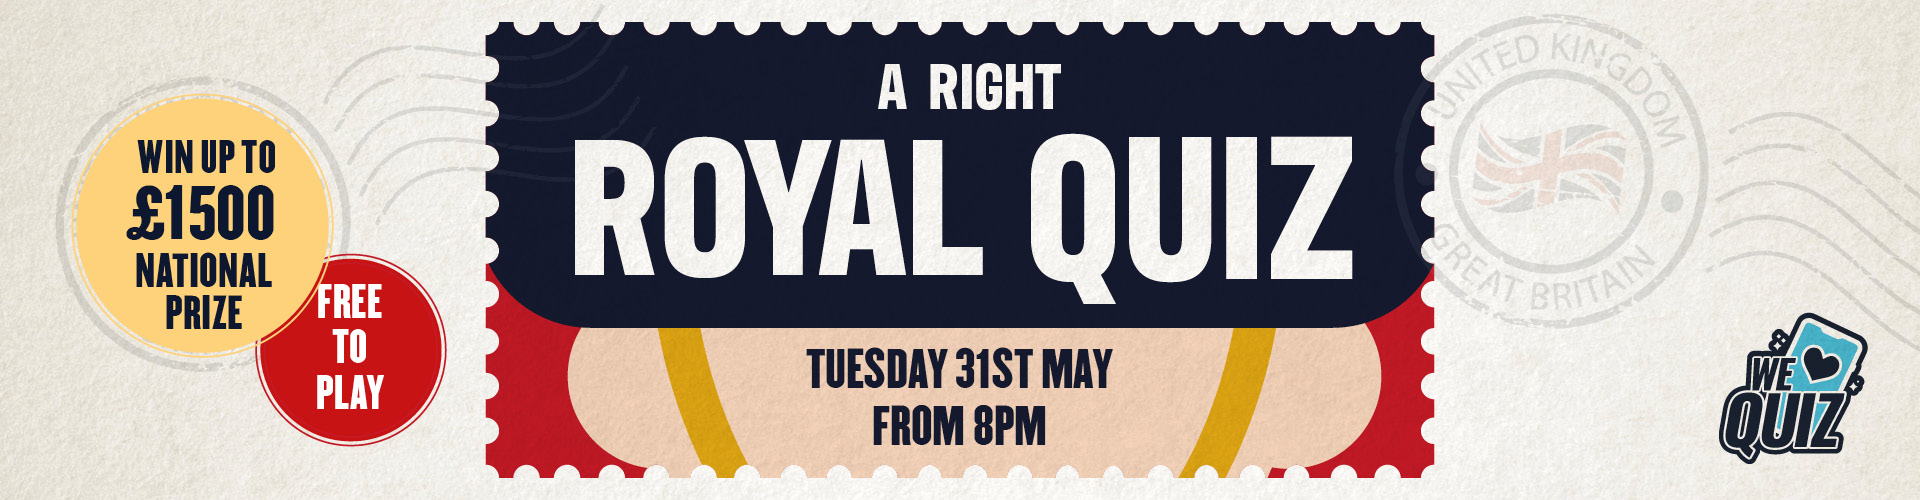 A Right Royal Quiz, 31st May from 8pm. Win up to £1500, free to play.